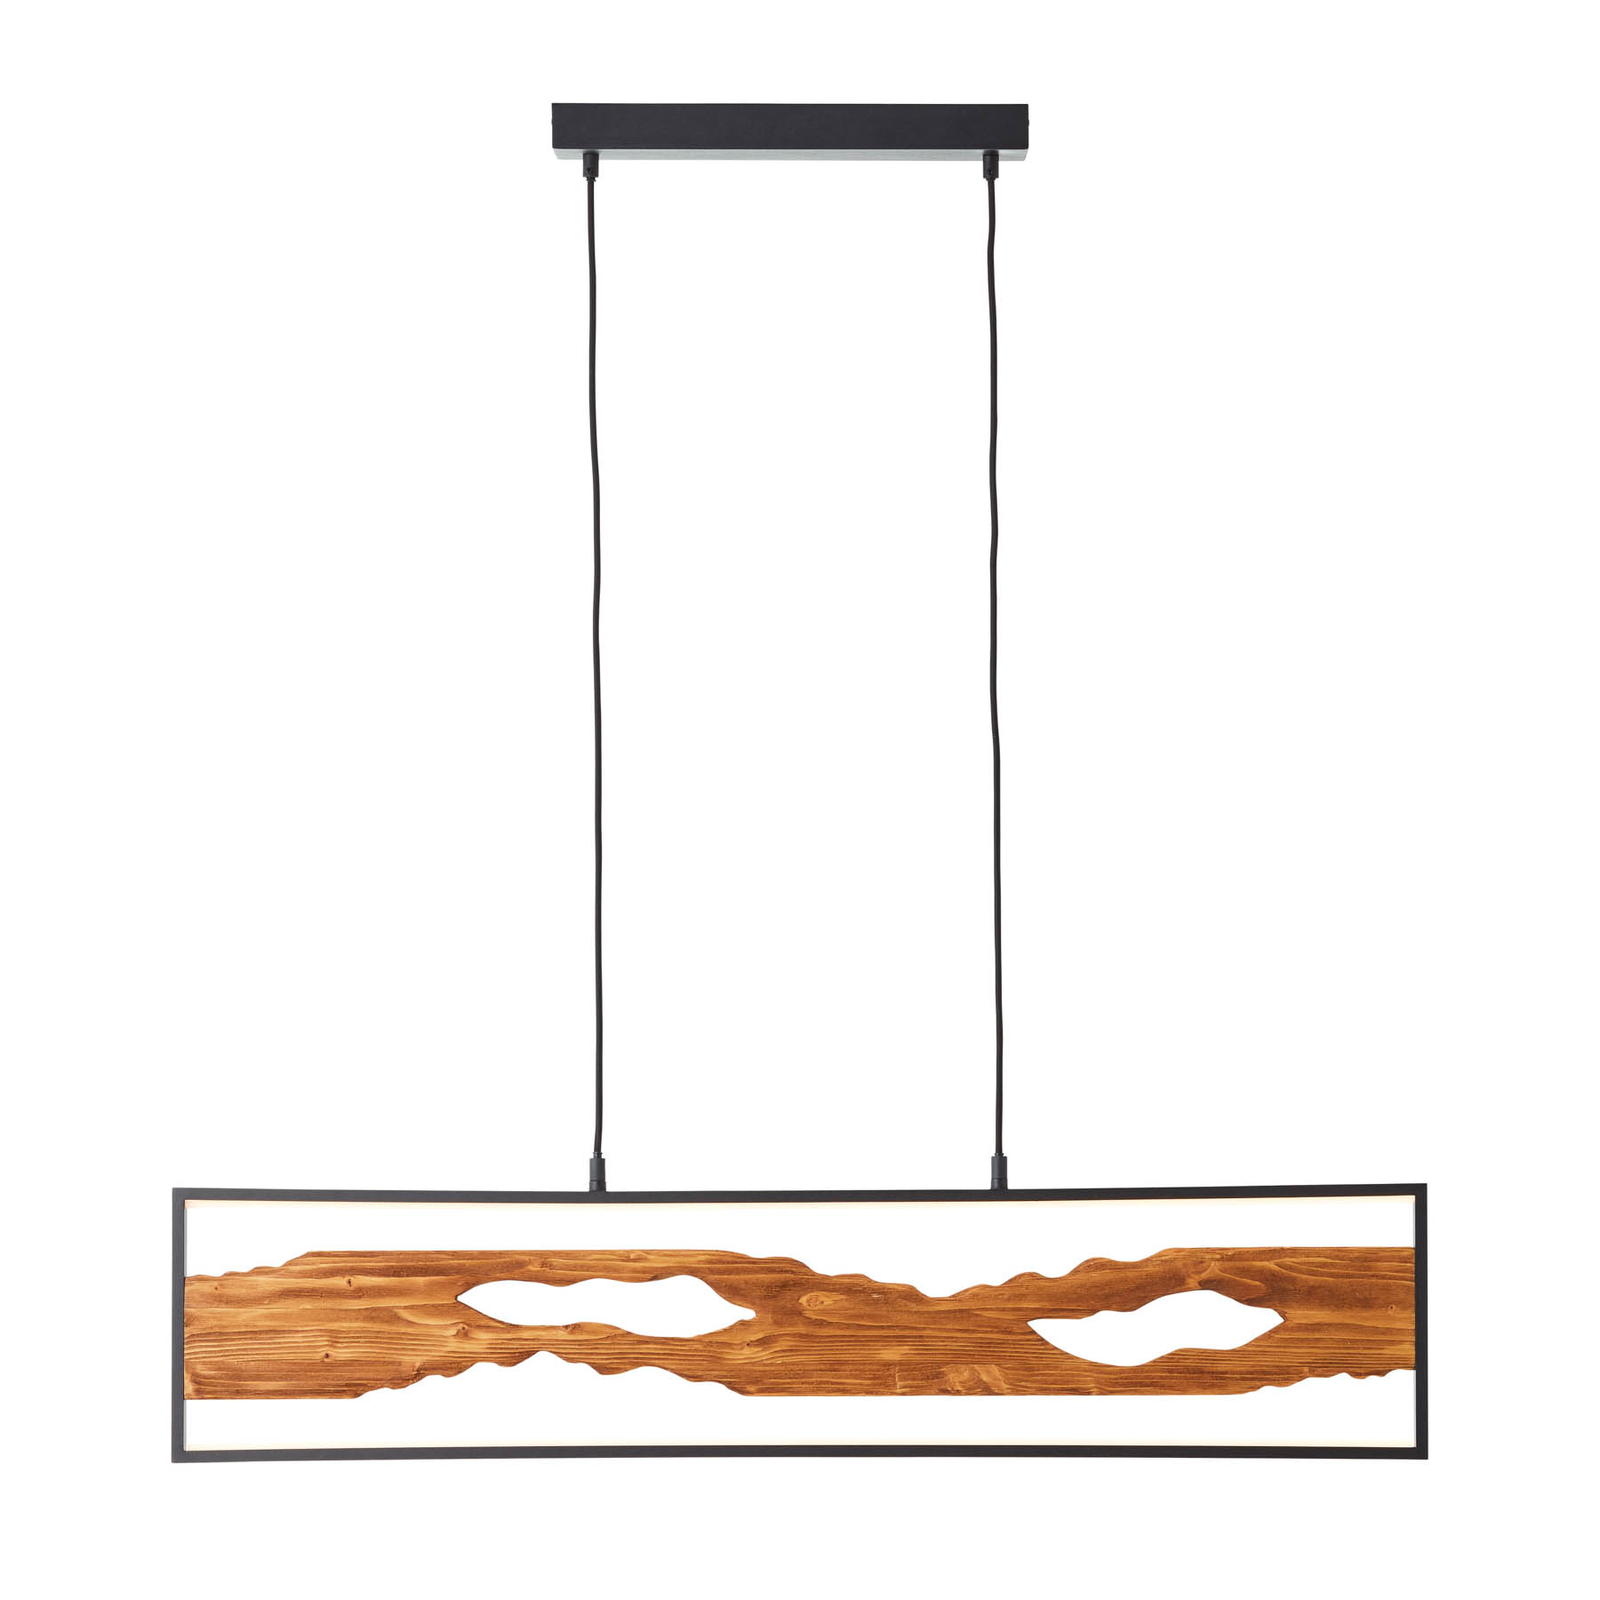 Chaumont LED pendant light made of wood